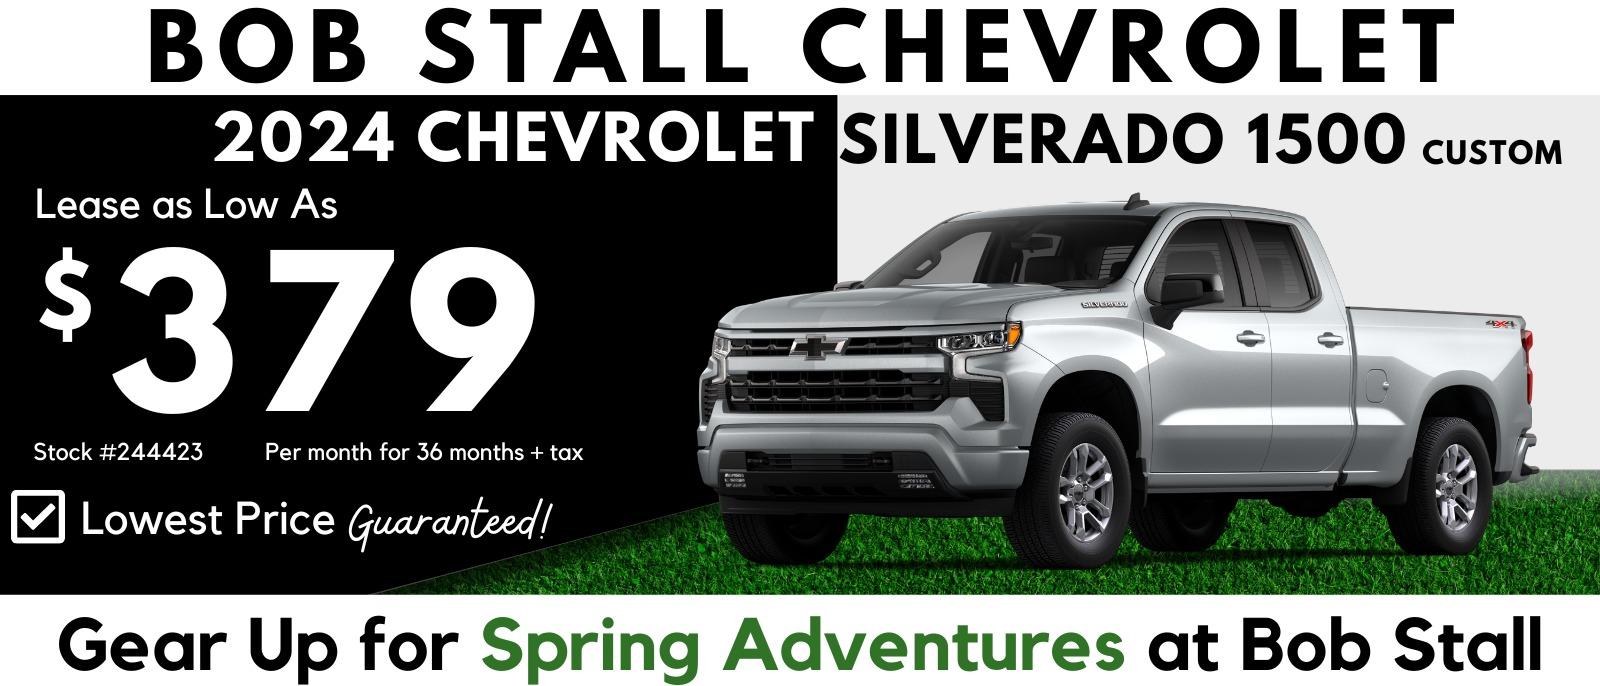 Int Silverado 2024  Savings - Lease as low as $379 per month for 36 Months